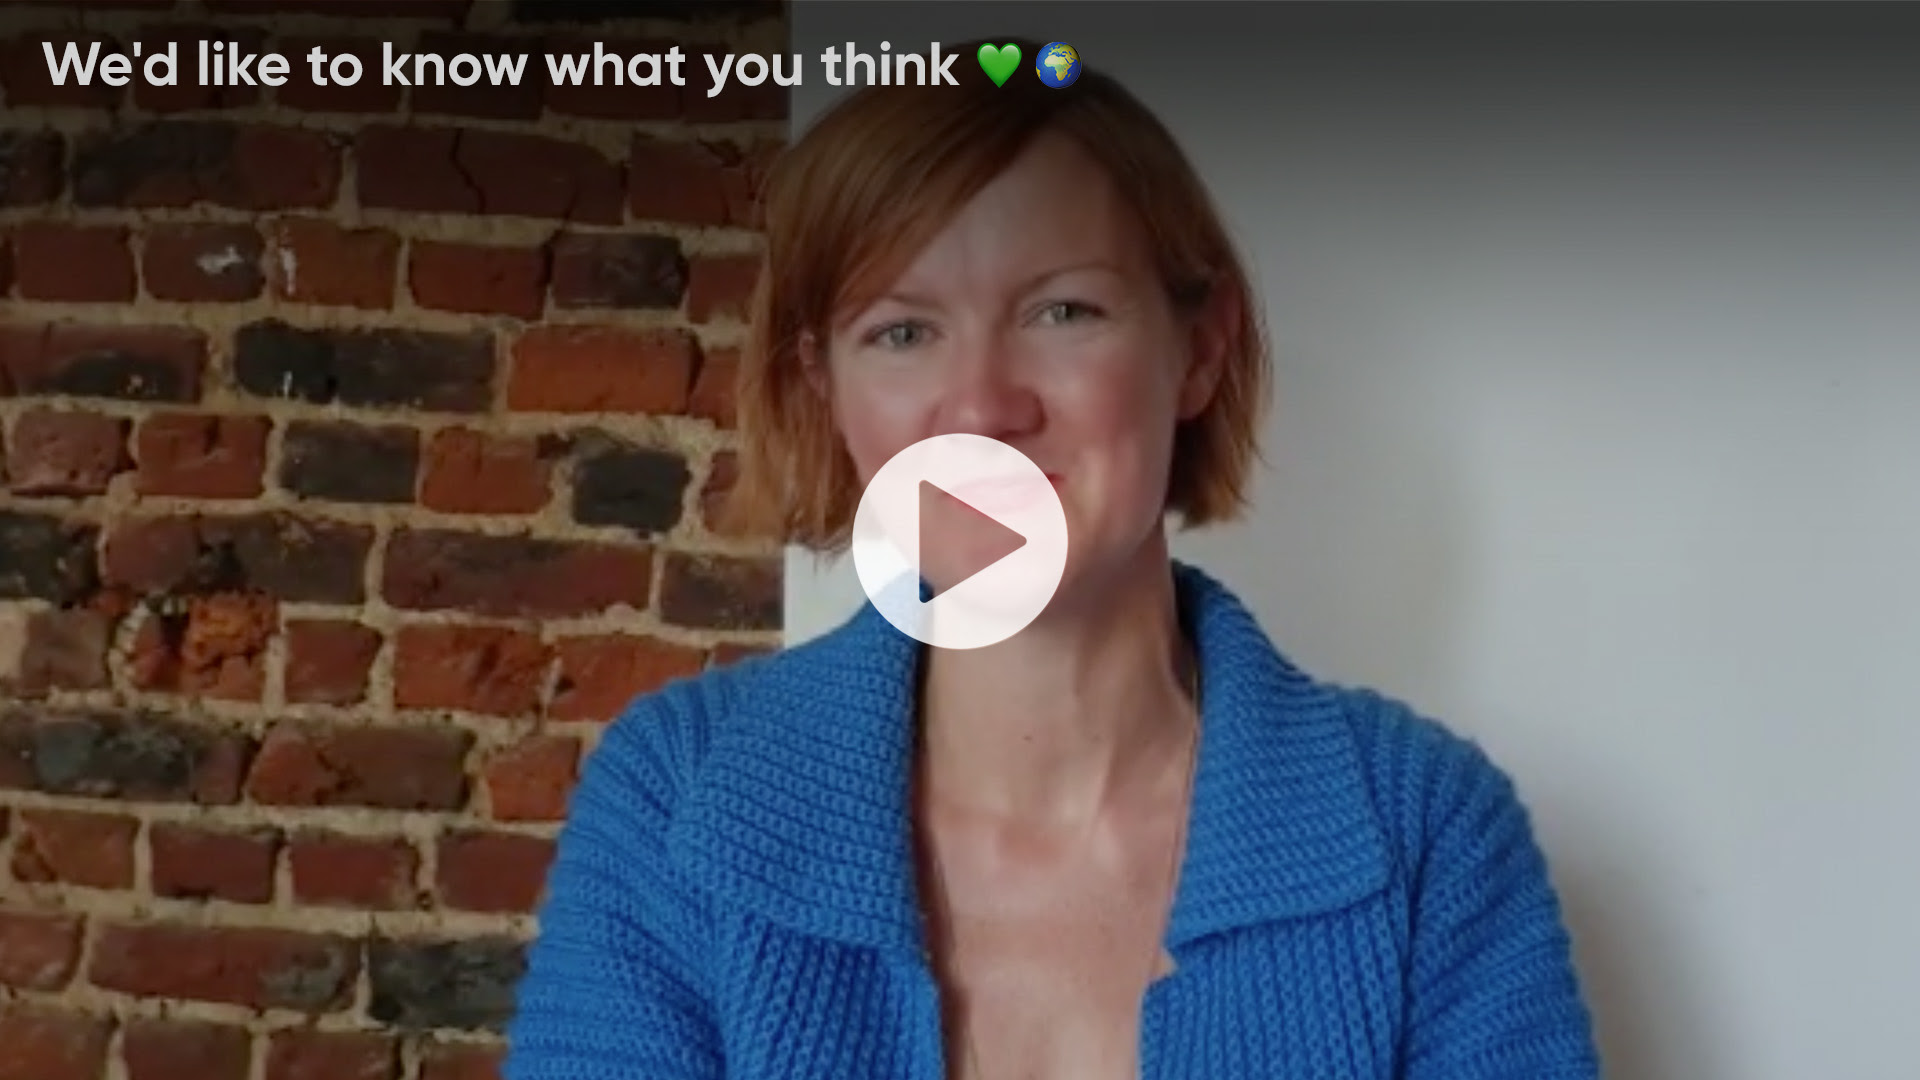 Video titled &quot;We&#39;d like to know what you think&quot;, woman with short red hair and blue top in centre, brick wall behind on left, white on right, play button over top in centre